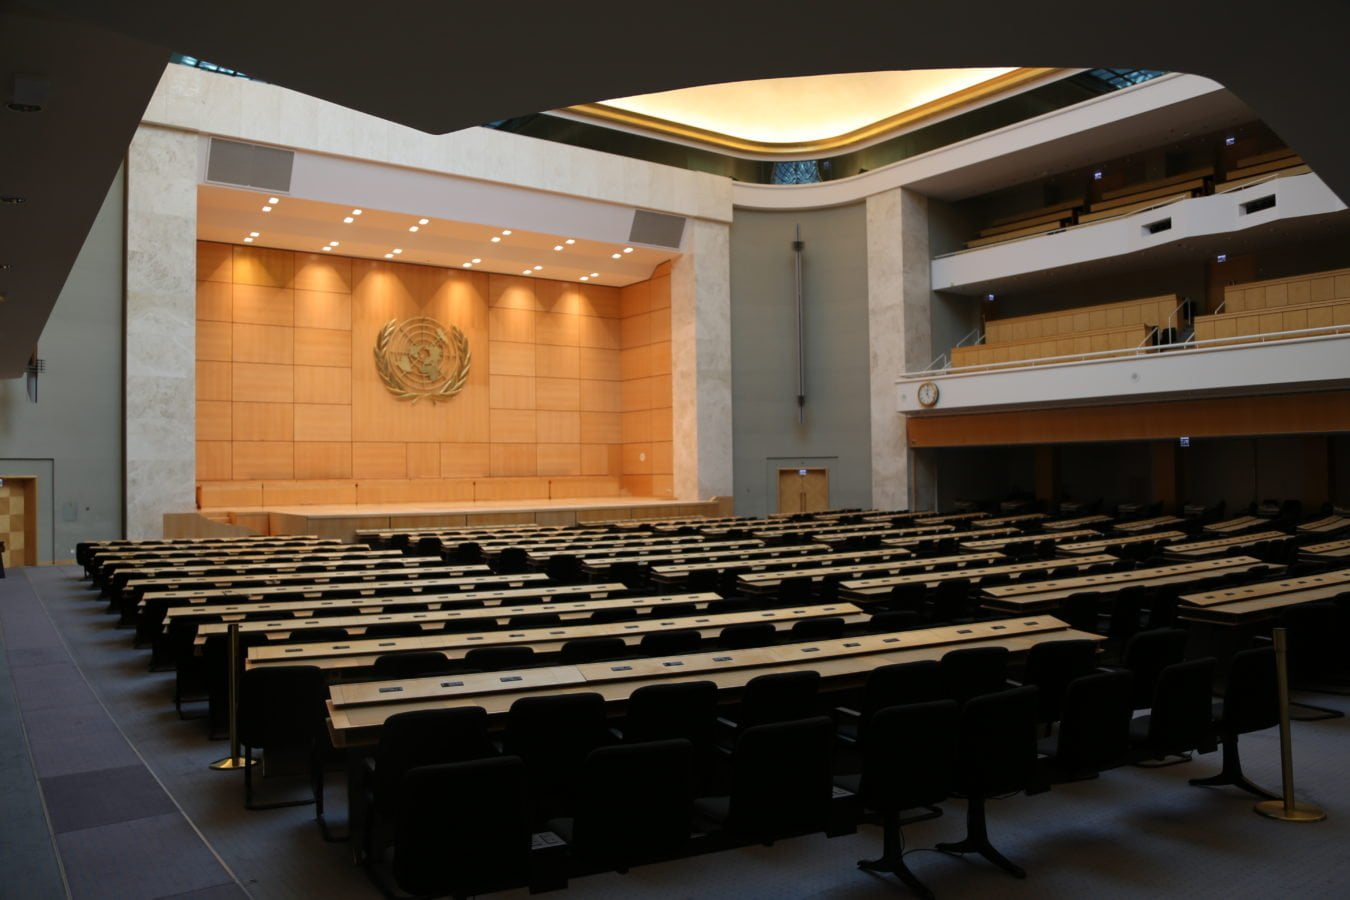 Interior photograph of the large international meeting chamber room at the UN in Geneva, Switzerland. The room is empty.